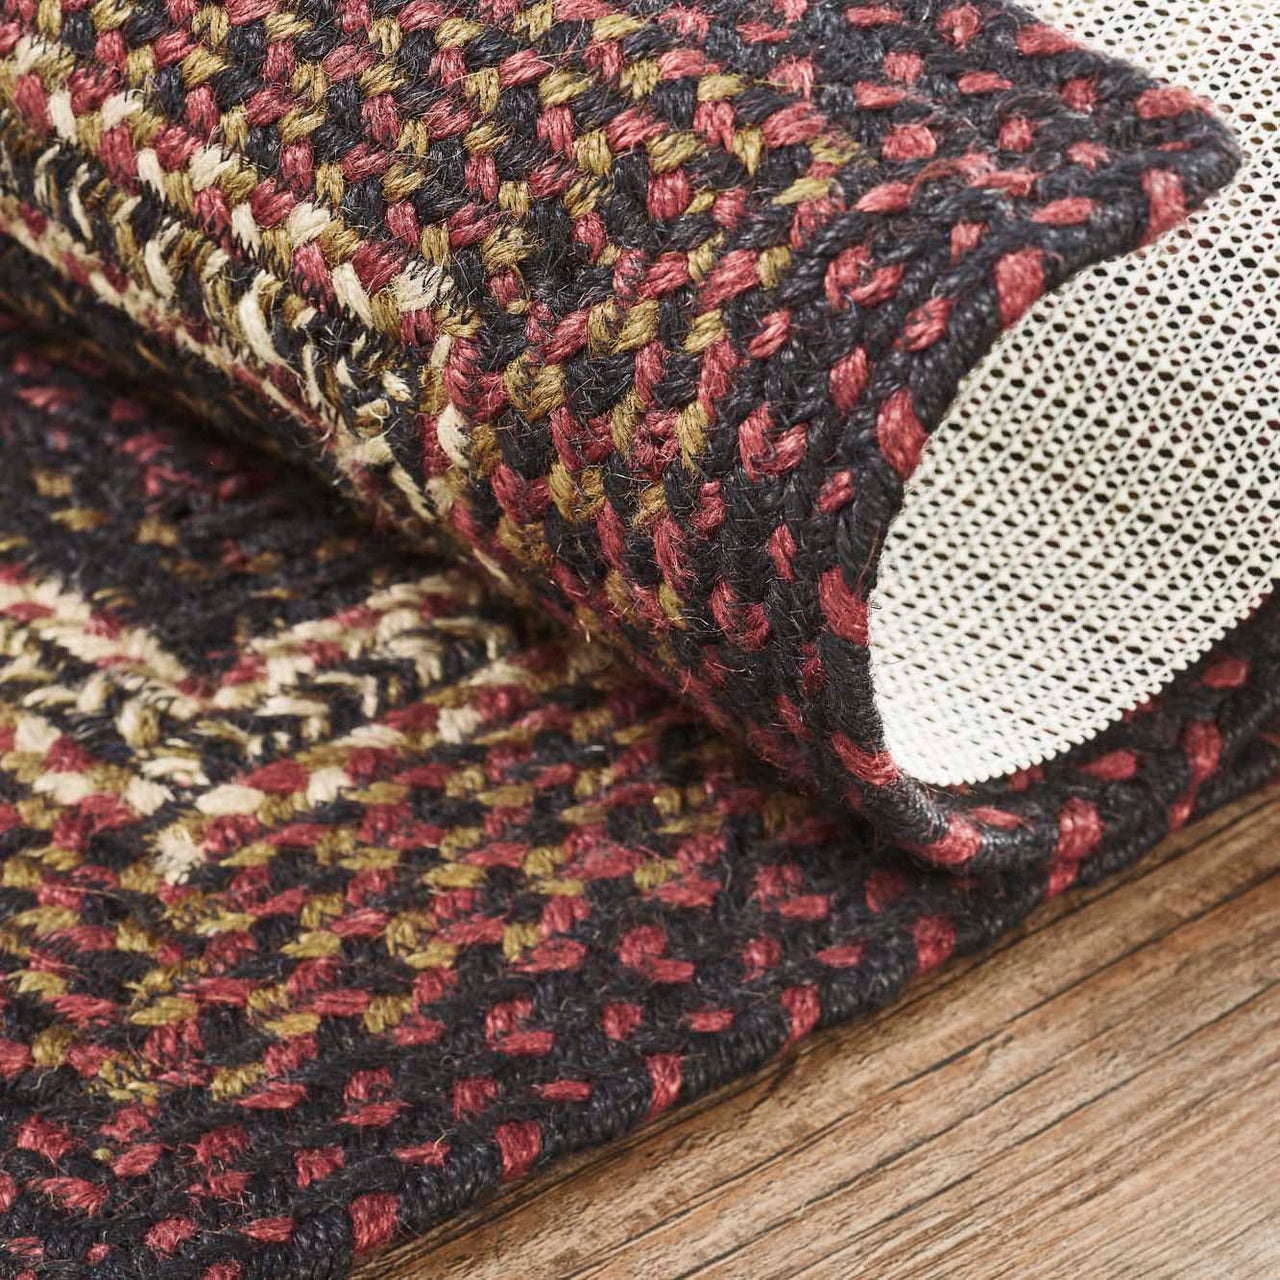 Beckham Jute Braided Rug Rect with Rug Pad 5'x8' VHC Brands